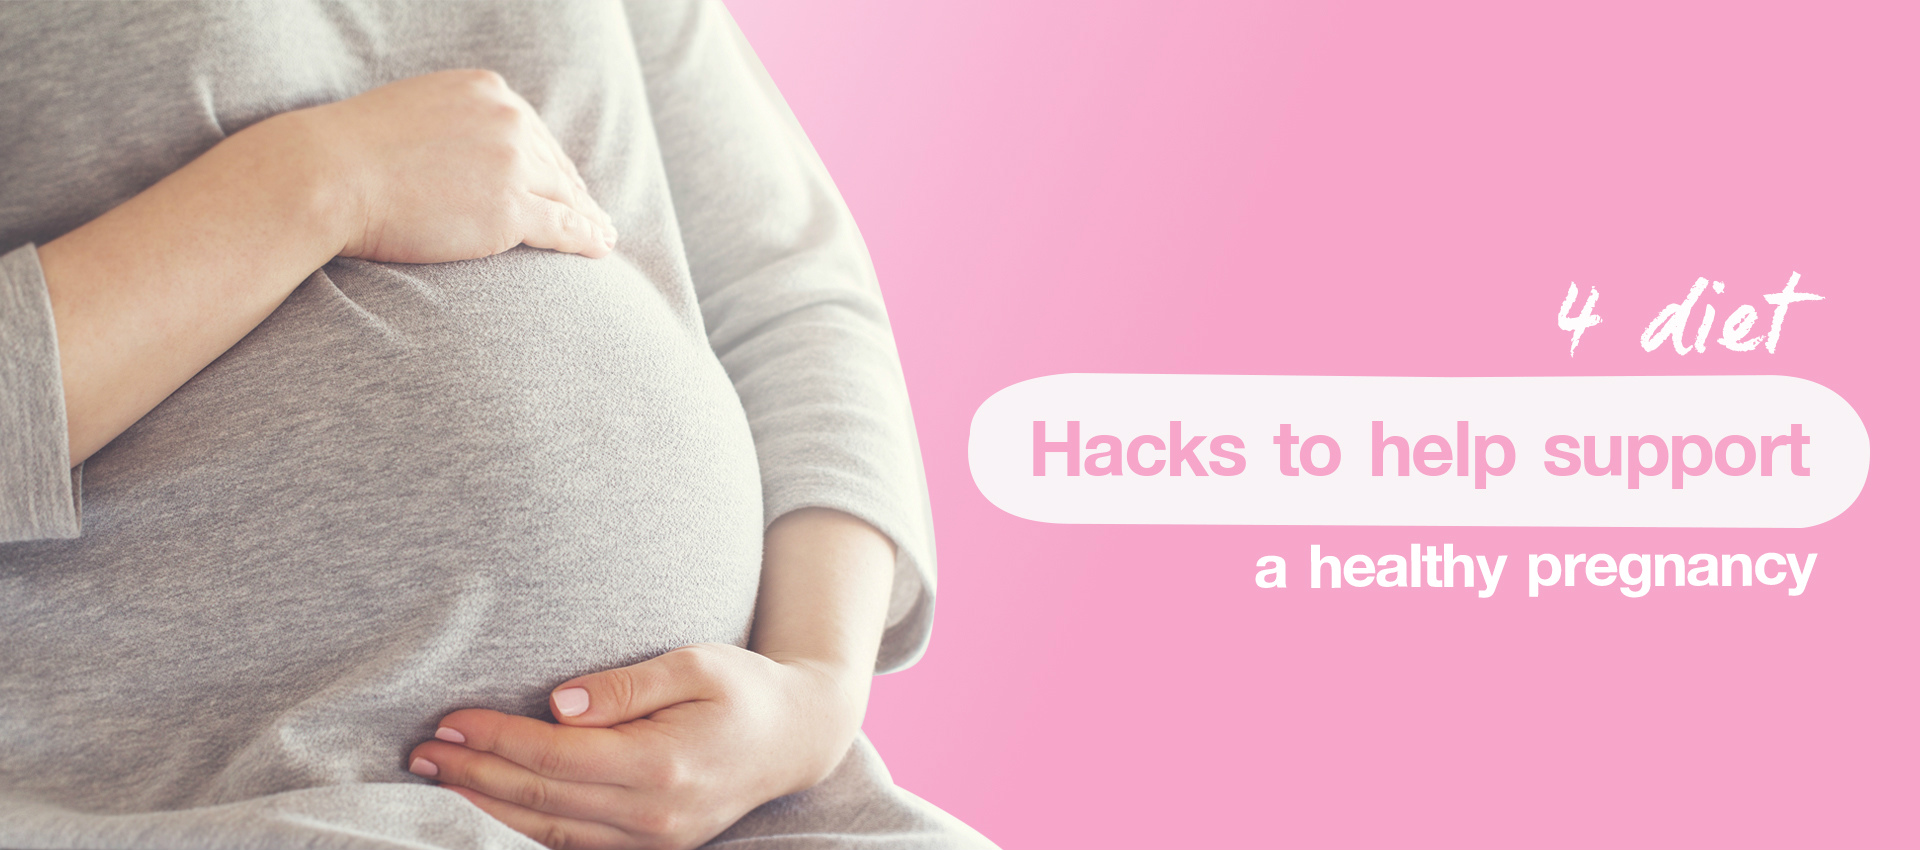 4 diet hacks to help support a healthy pregnancy